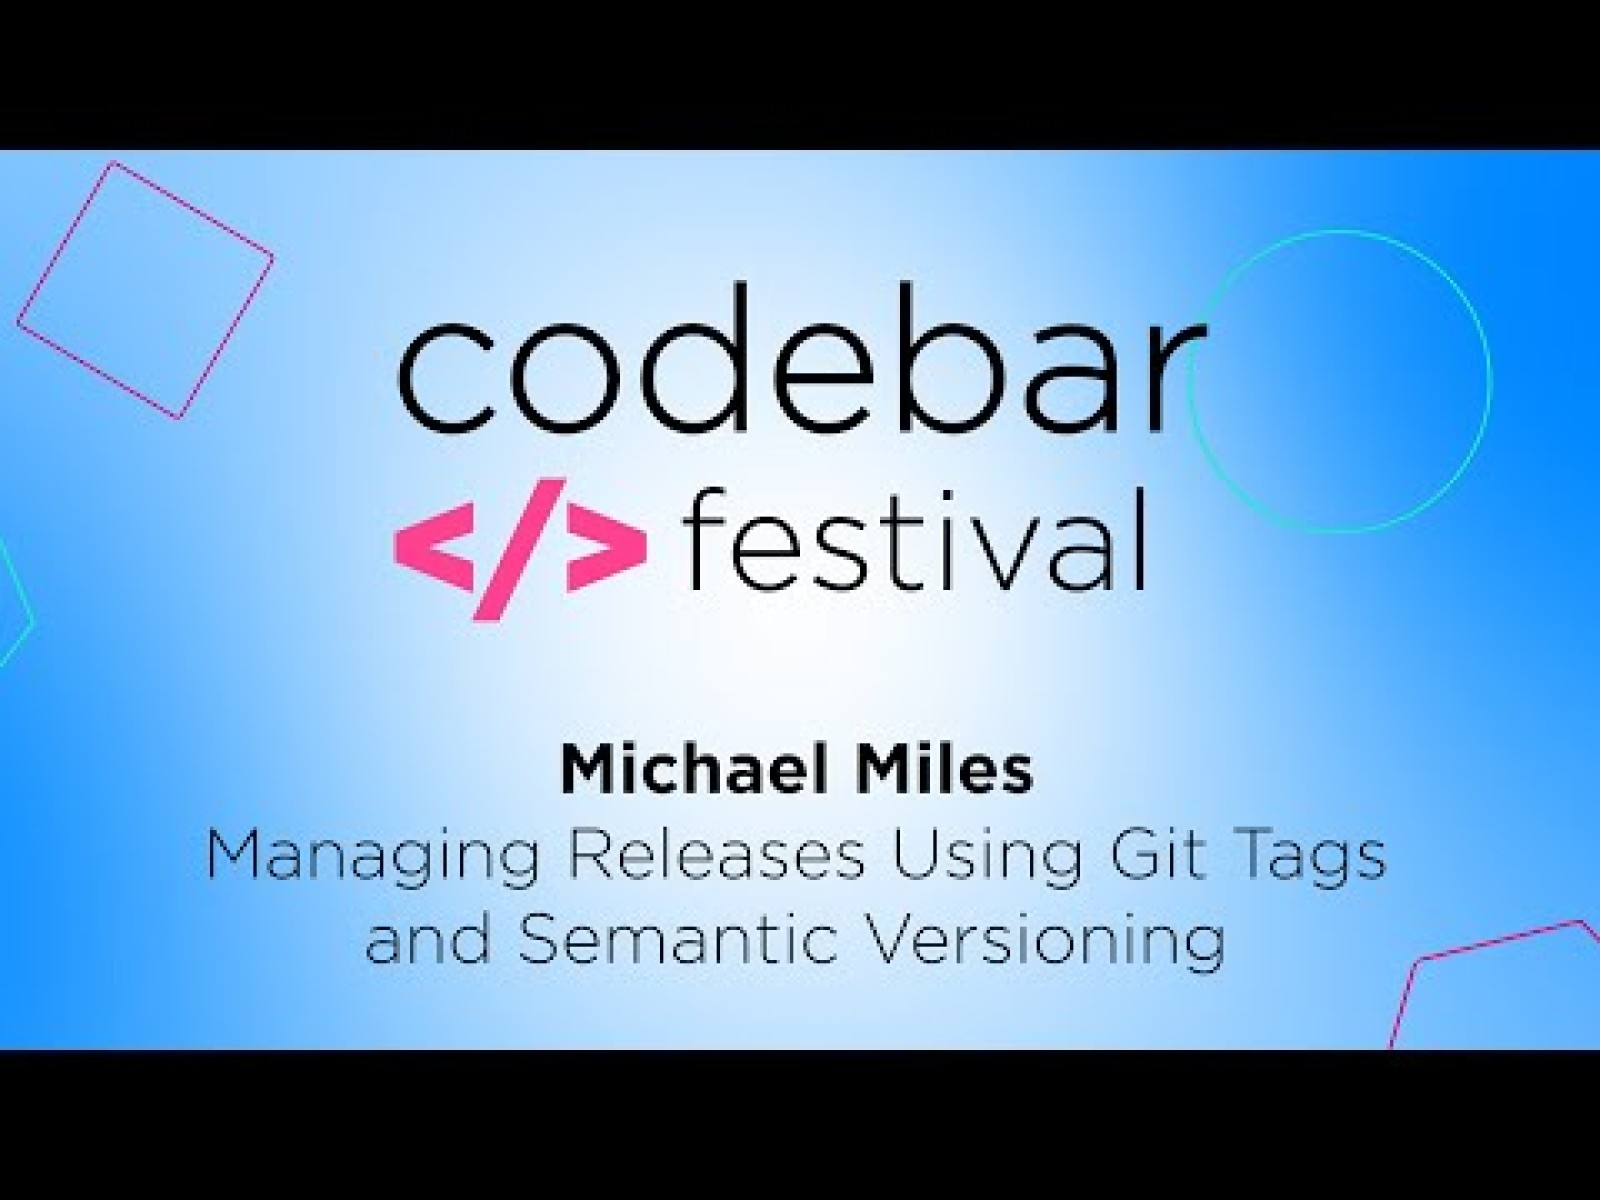 Managing releases using Git tags and semantic versioning